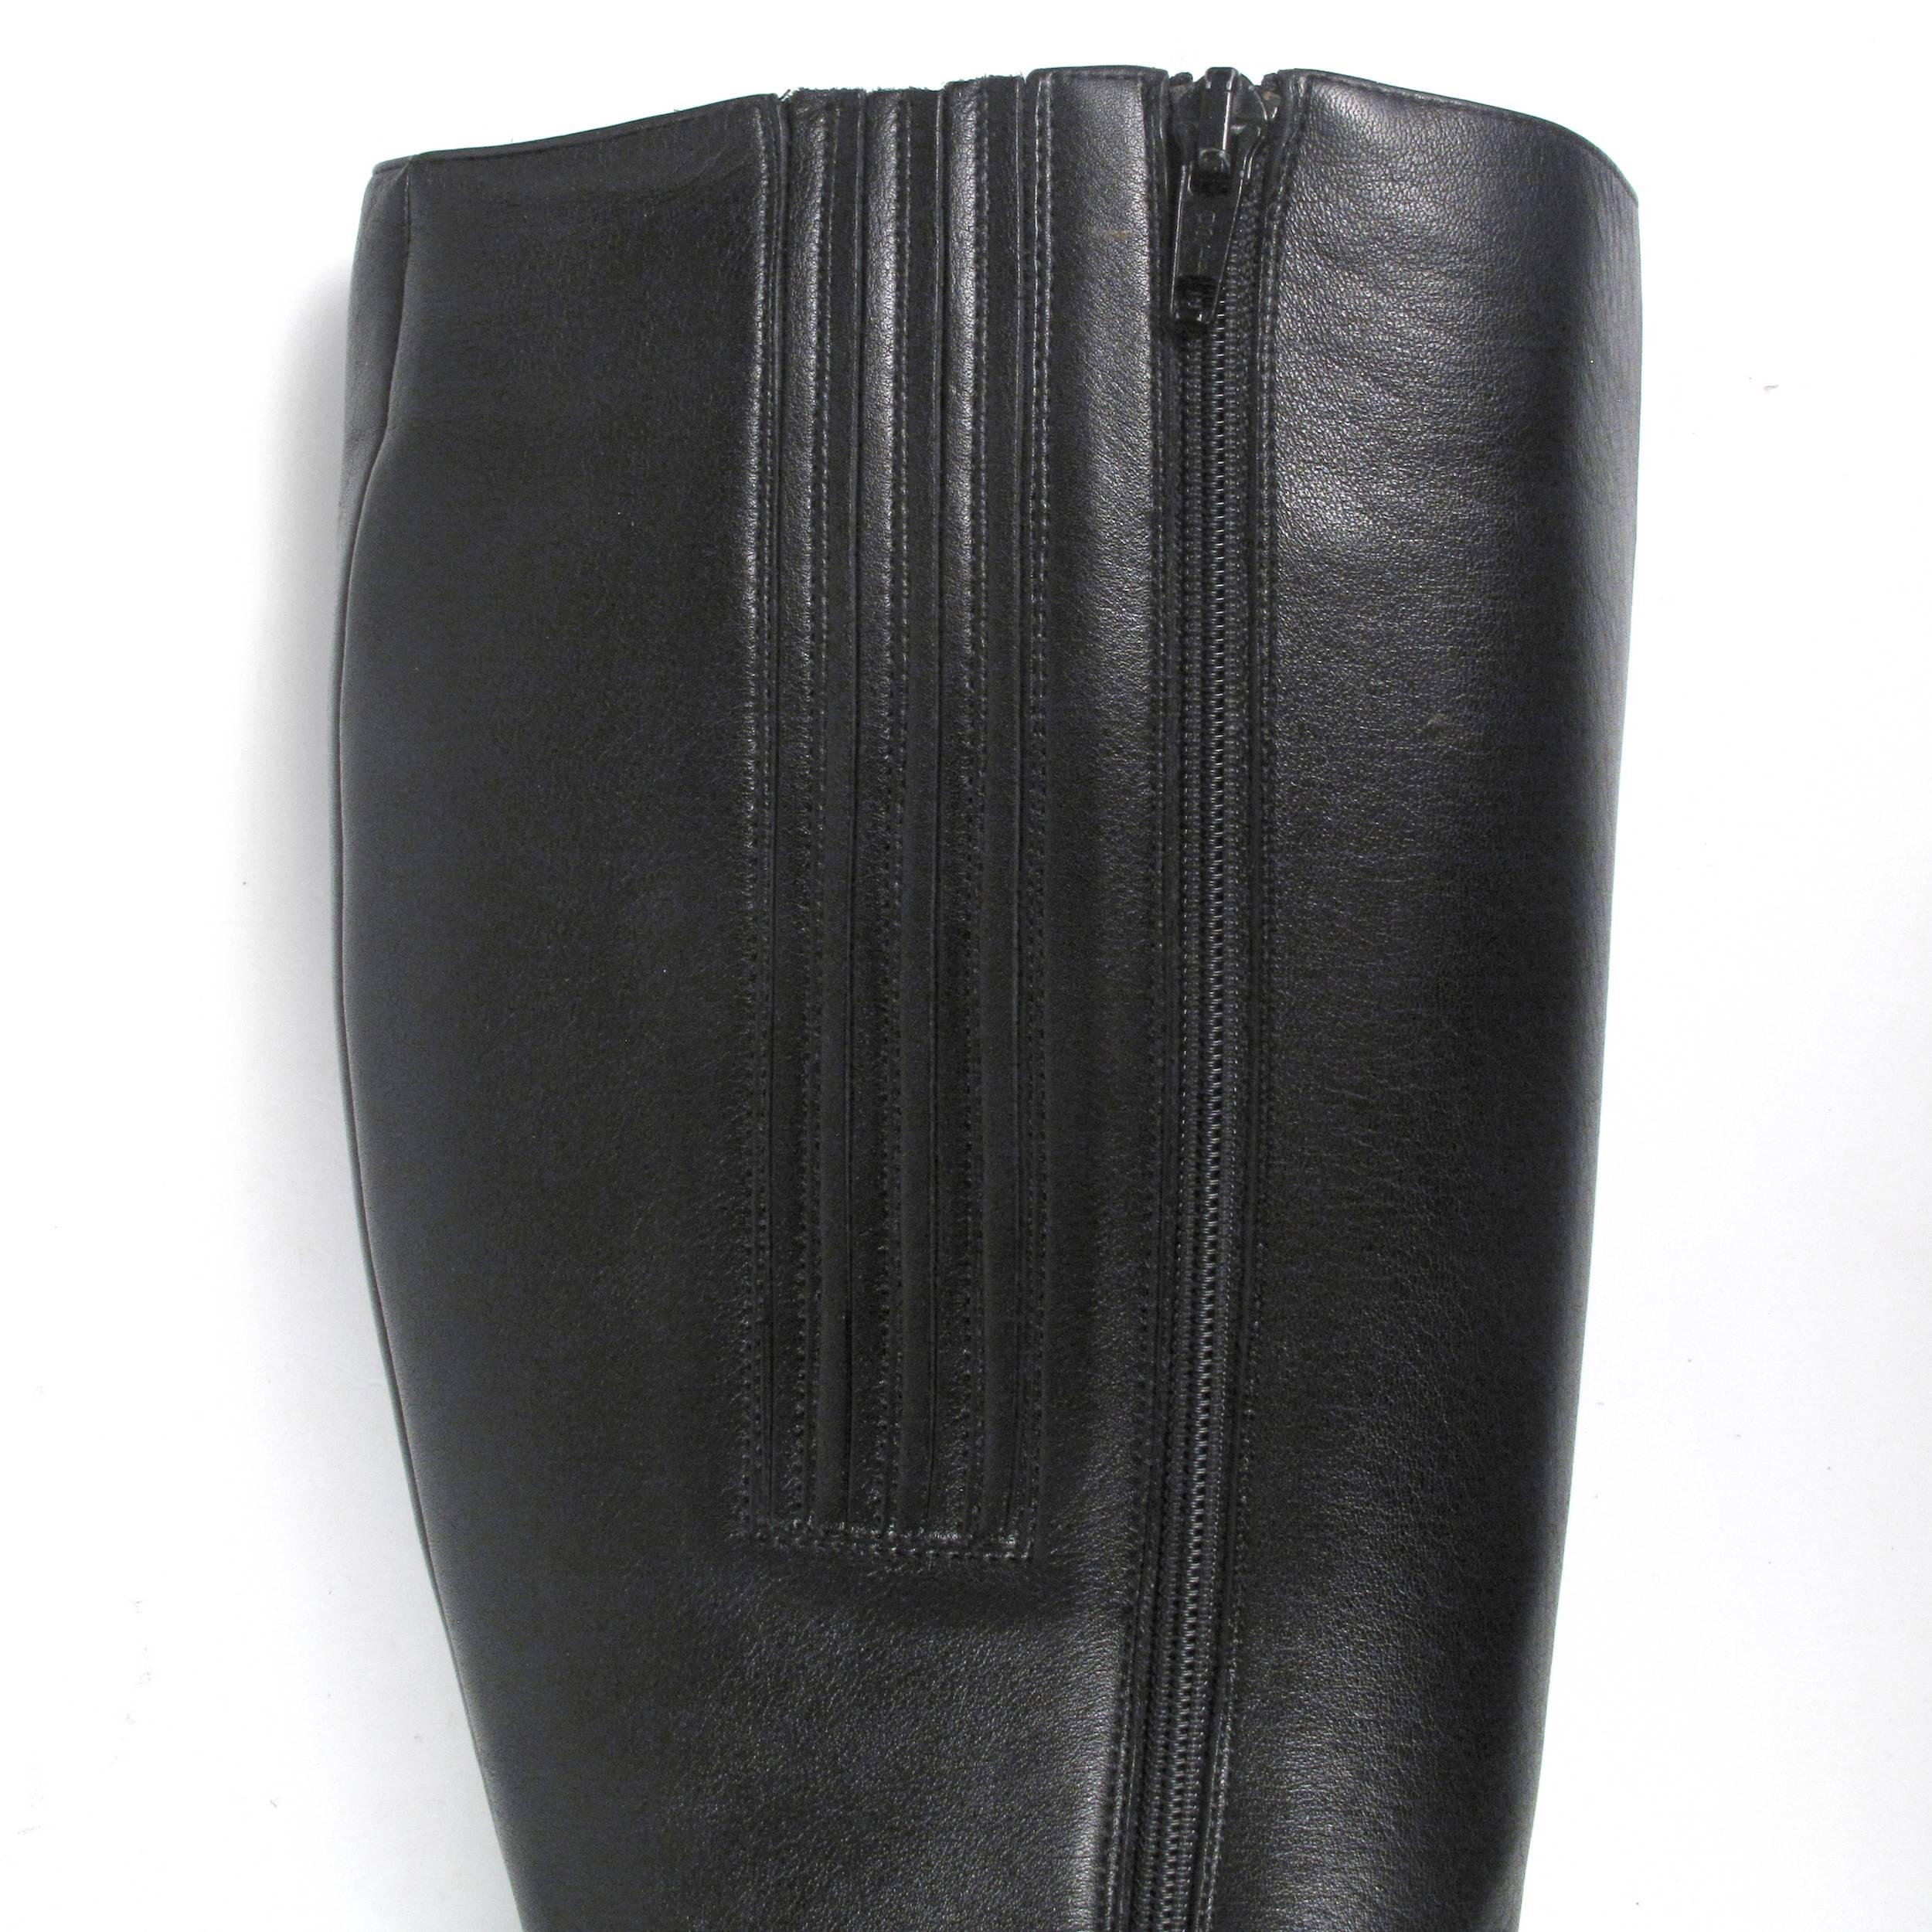 Christian Louboutin Knee High Boots 39 Black Leather120 Heels Shoes Feticha In Good Condition In Prahran, Victoria